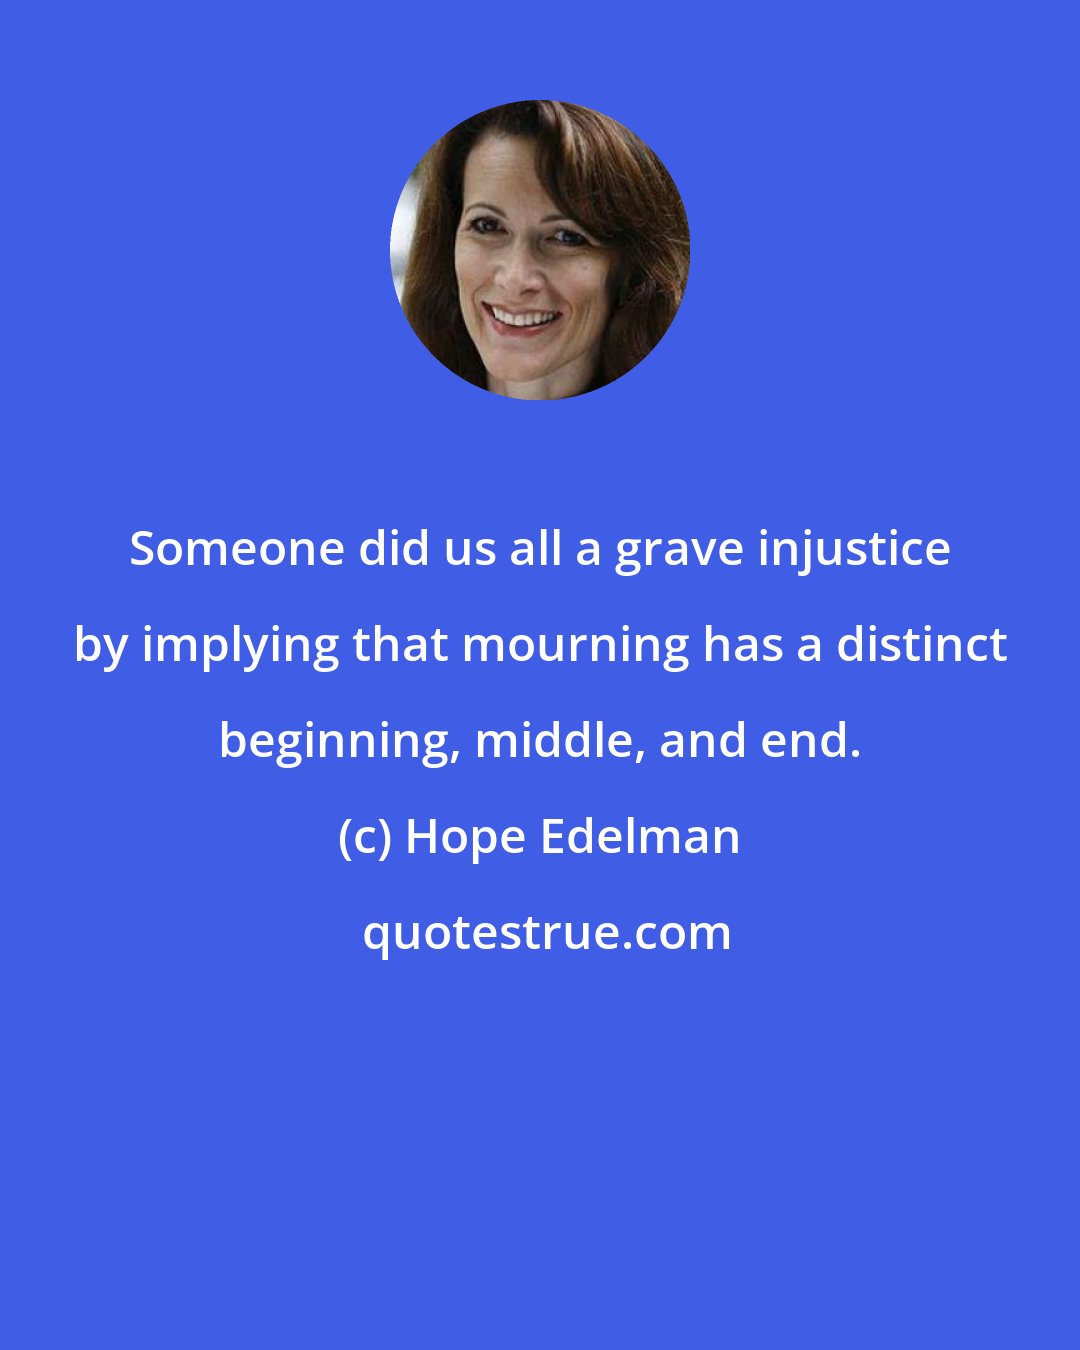 Hope Edelman: Someone did us all a grave injustice by implying that mourning has a distinct beginning, middle, and end.